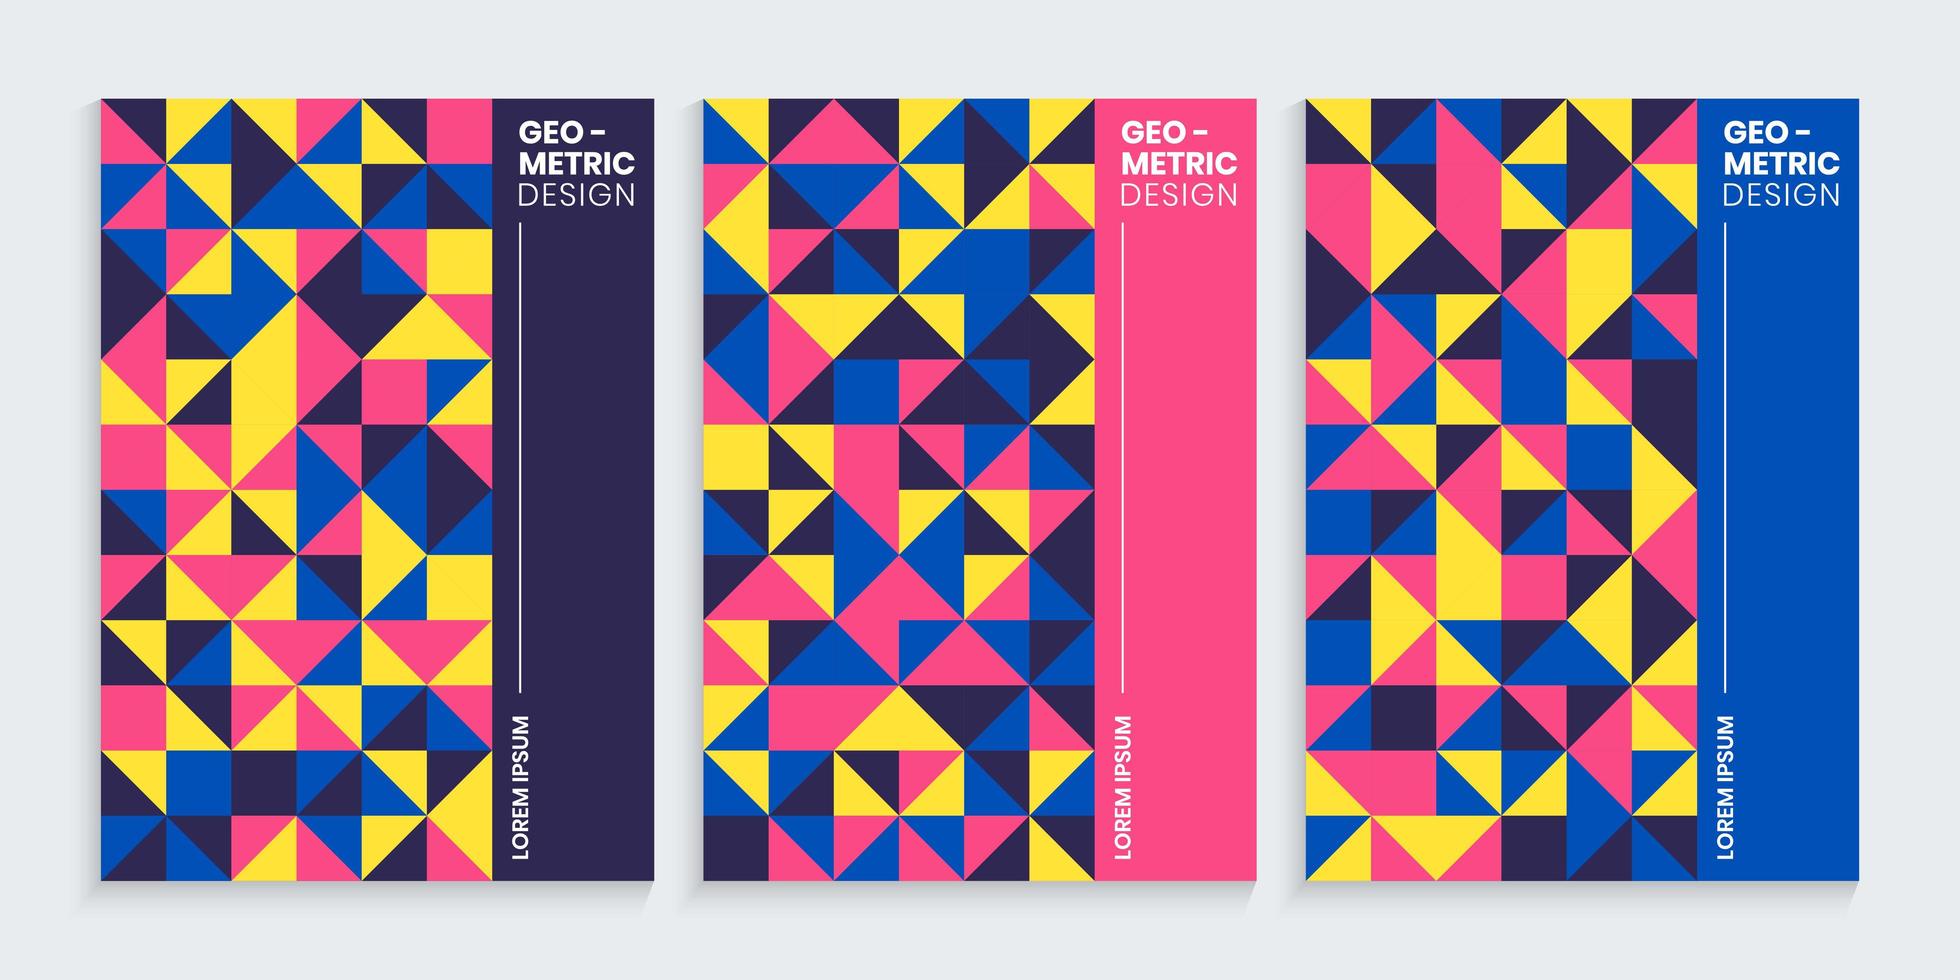 Geometric minimal covers design set with colorful shapes vector